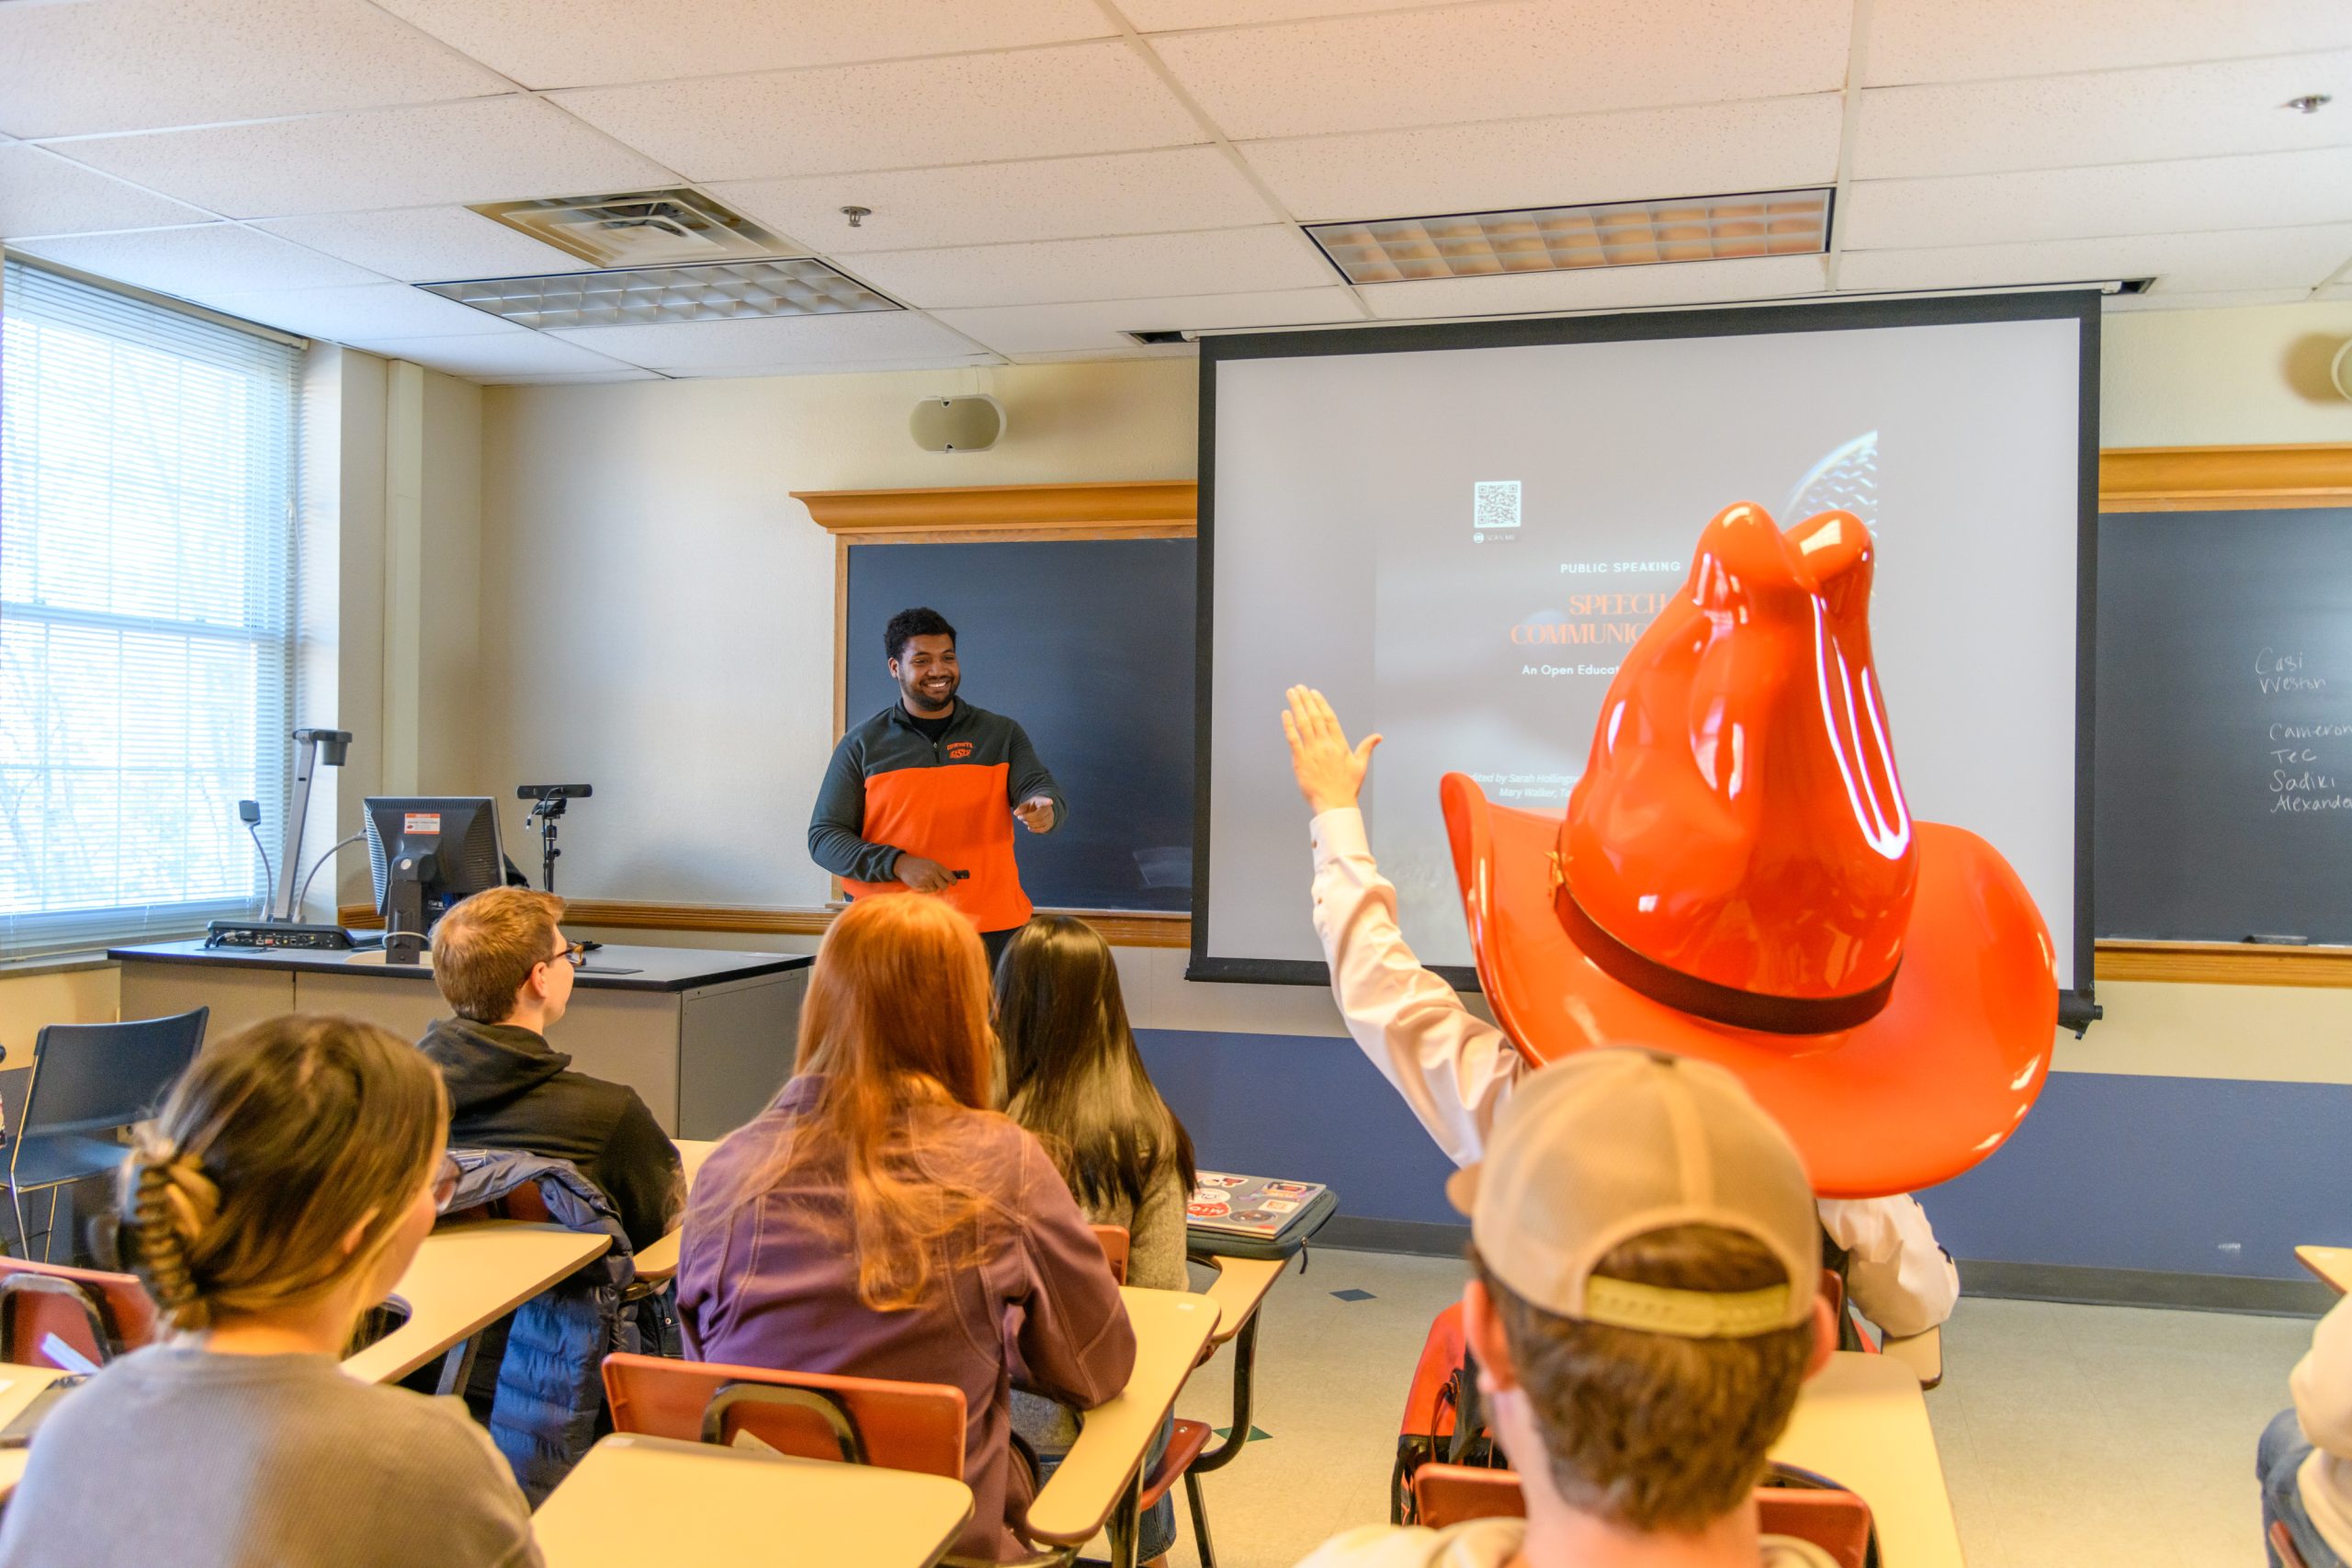 Pistol Pete sits in a desk in a classroom, while raising his hand to ask the speaker a question.